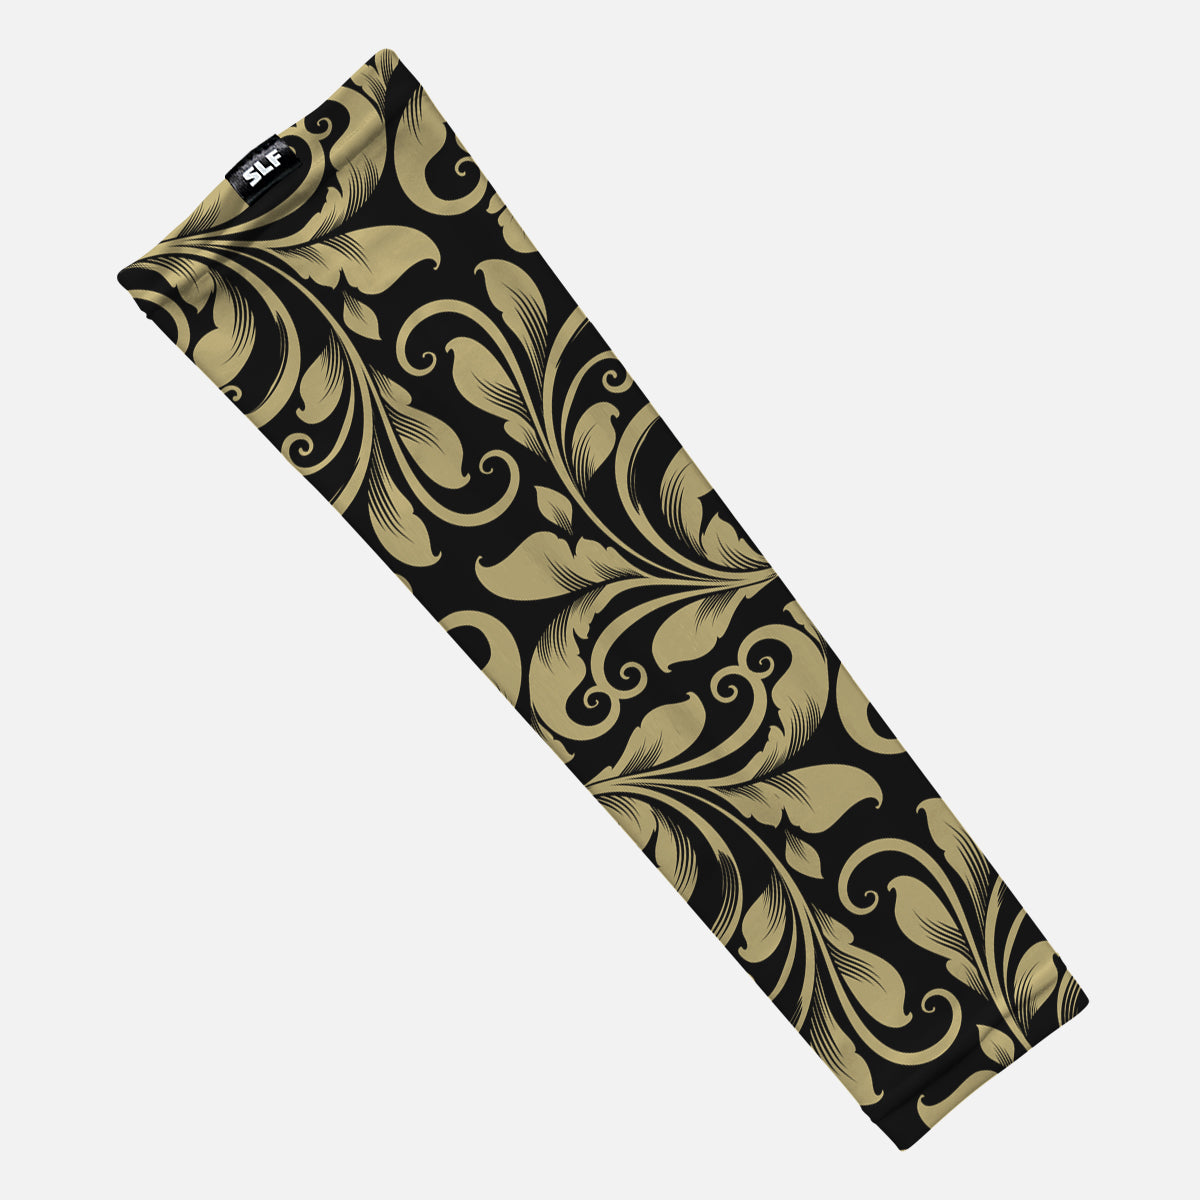 Baroque Old Gold and Black Arm Sleeve